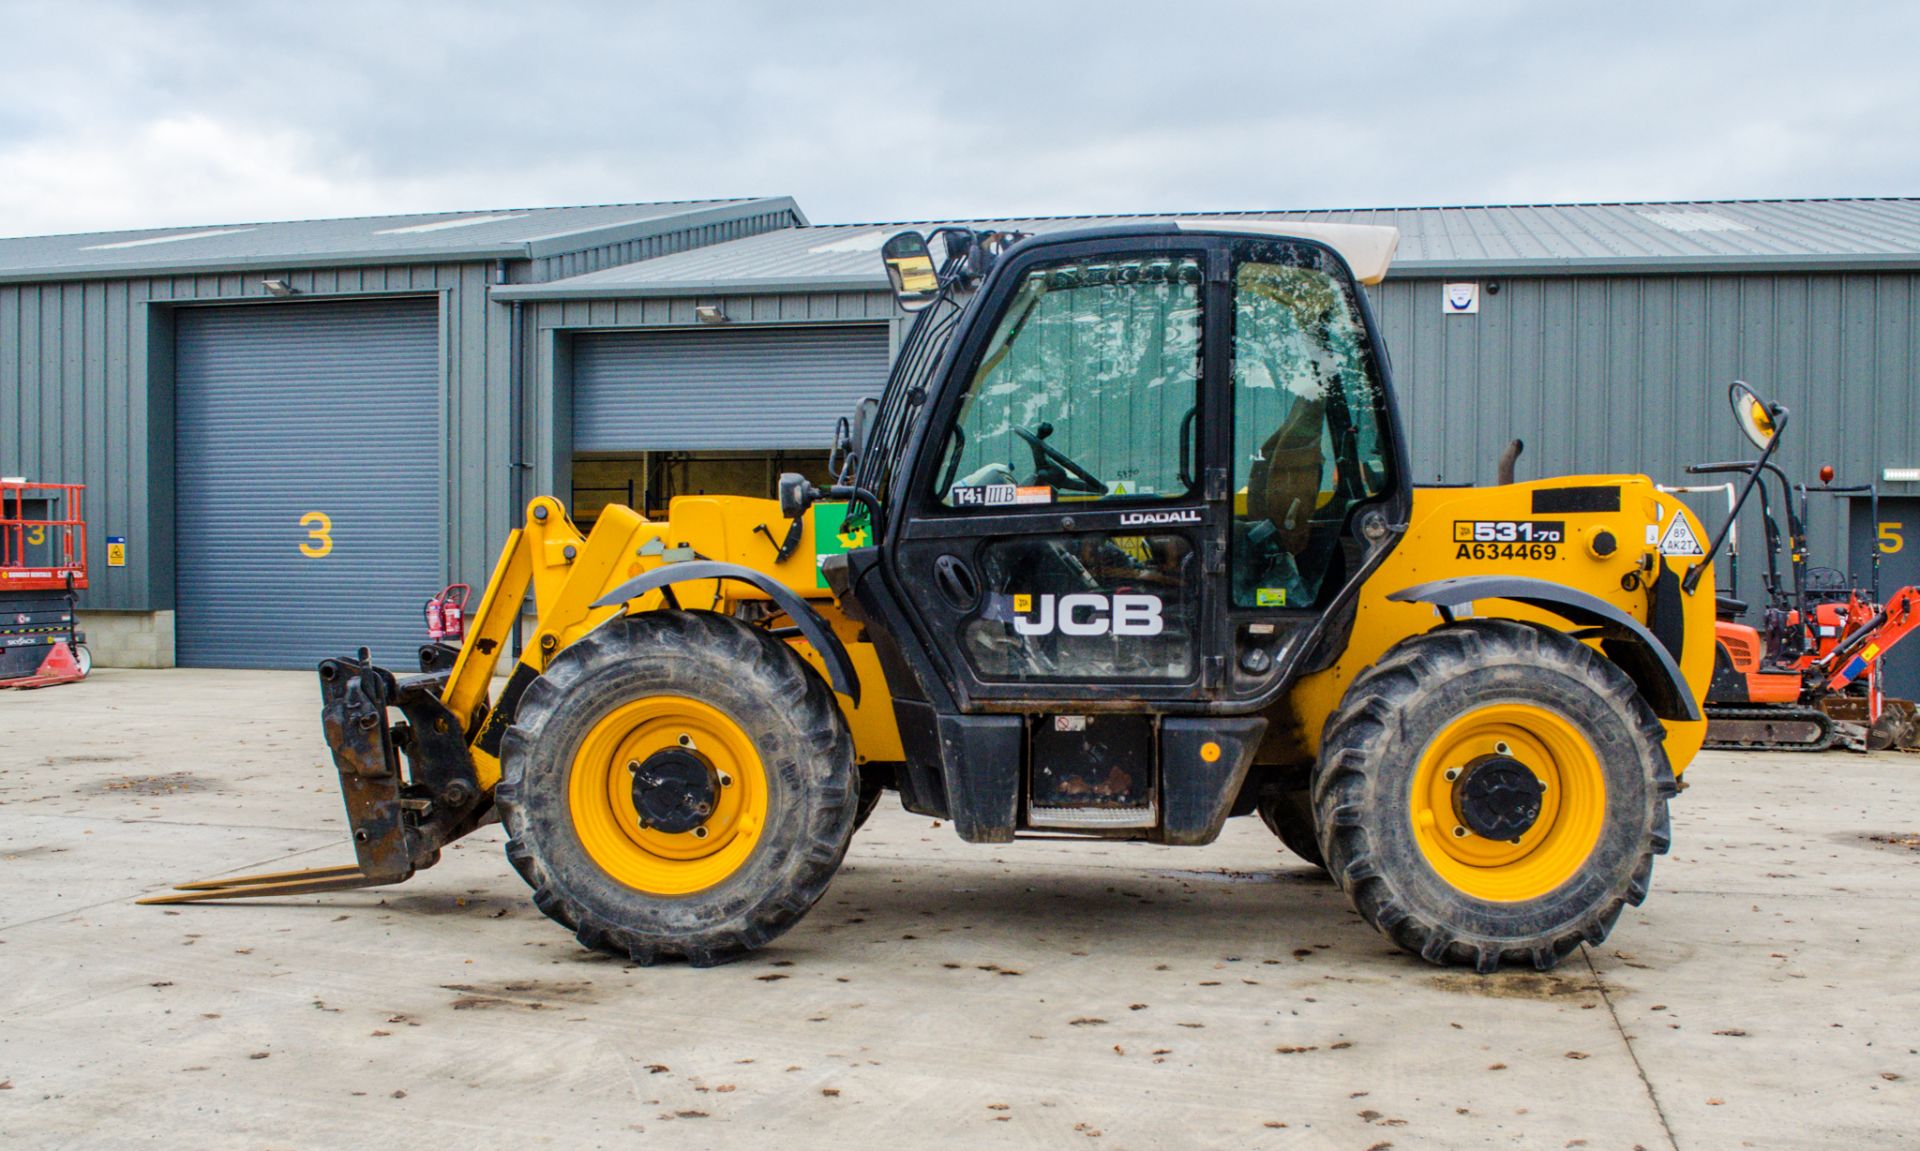 JCB 531-70 7 metre telescopic handler Year: 2014 S/N: 2340295 Recorded Hours: 2113 A634469 - Image 8 of 22